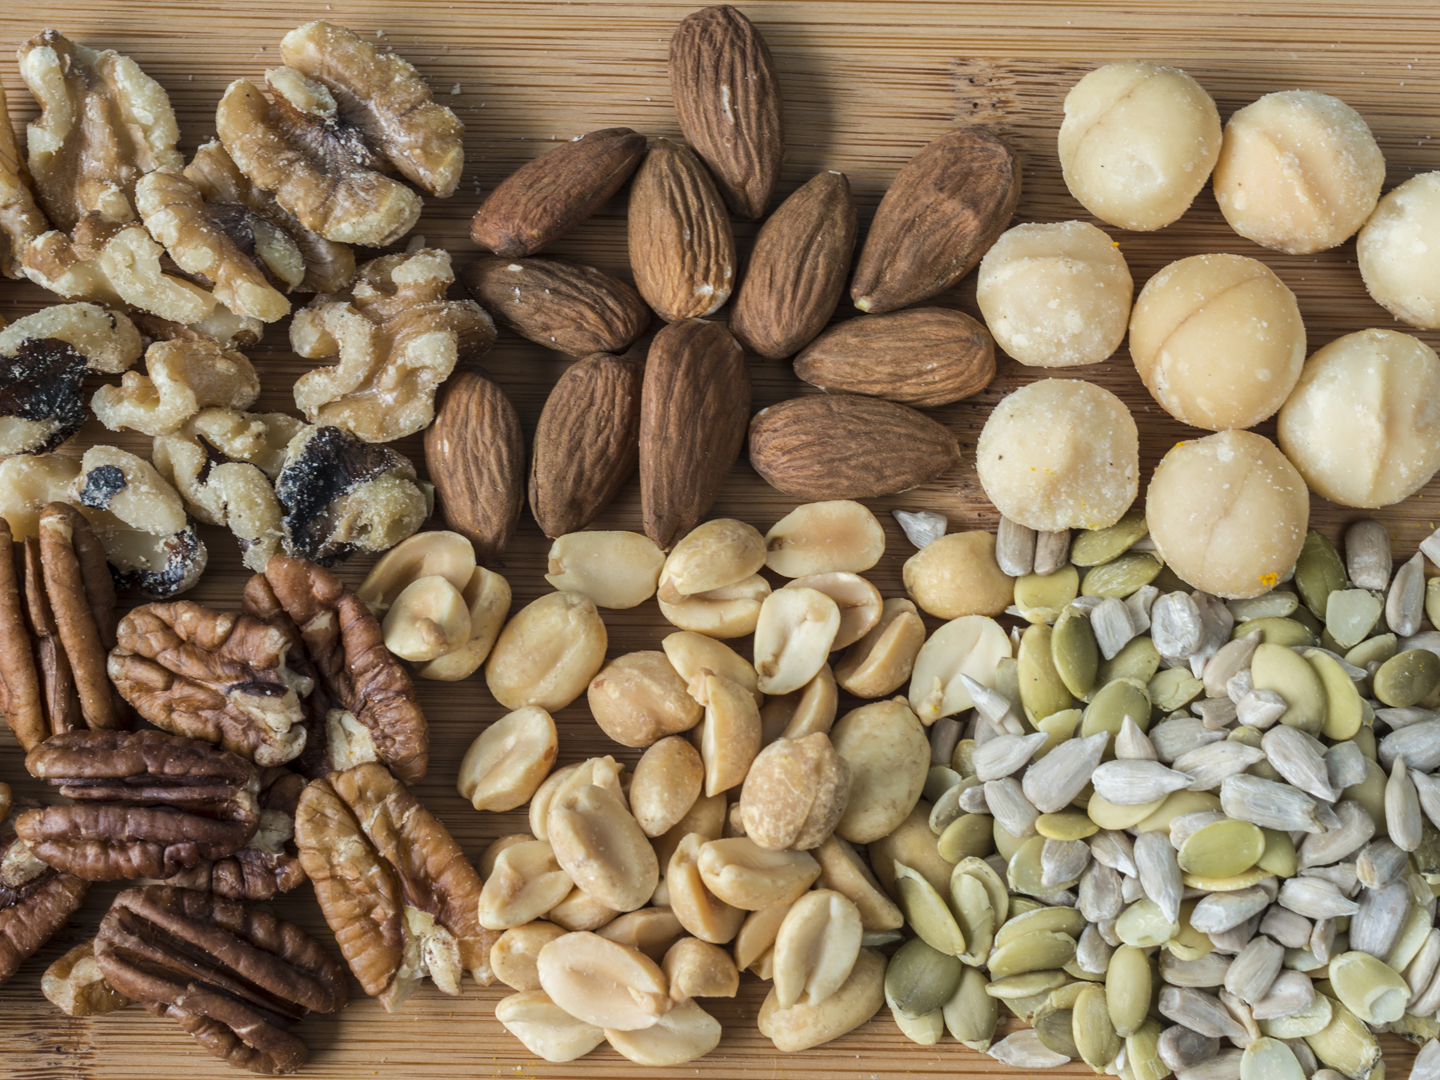 Variety of nuts and seeds on cutting board